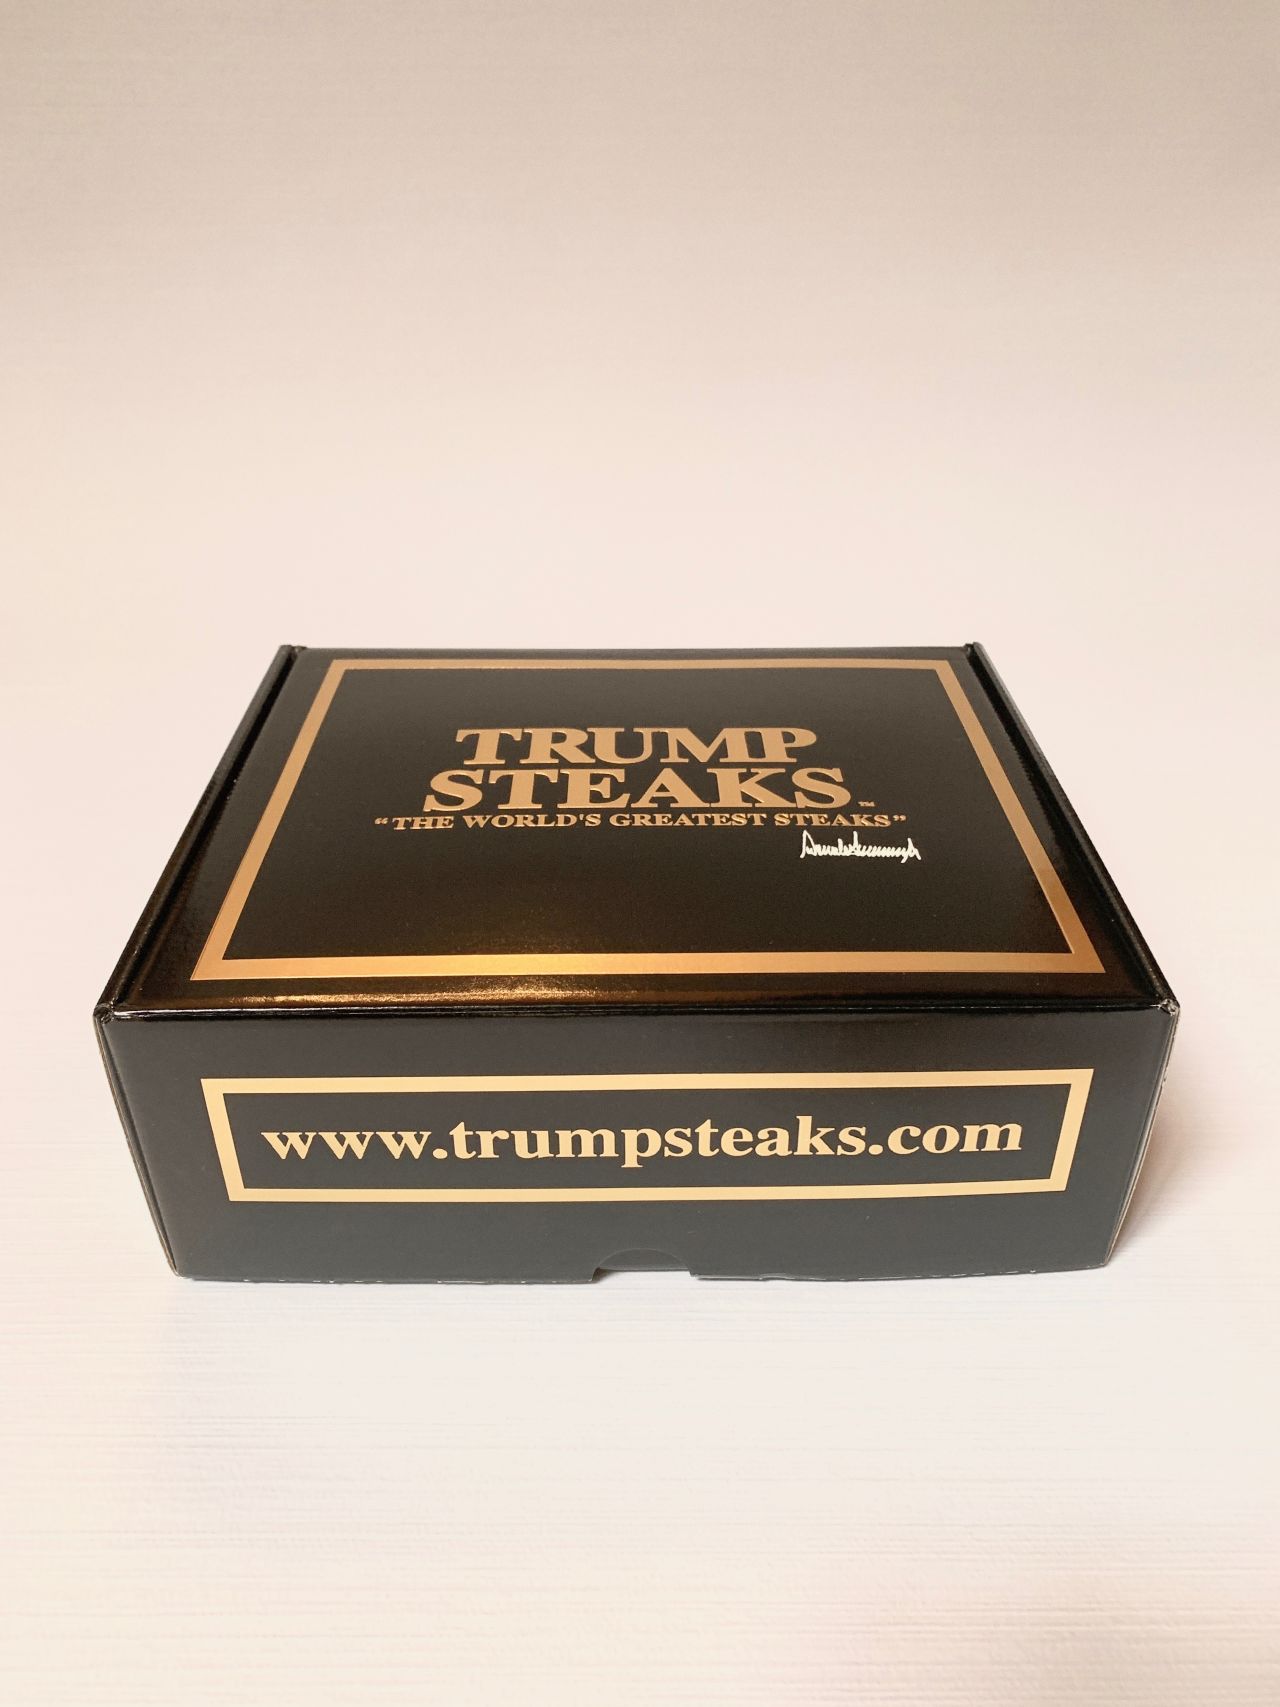 There an astonishing number of products featuring the Trump name. 